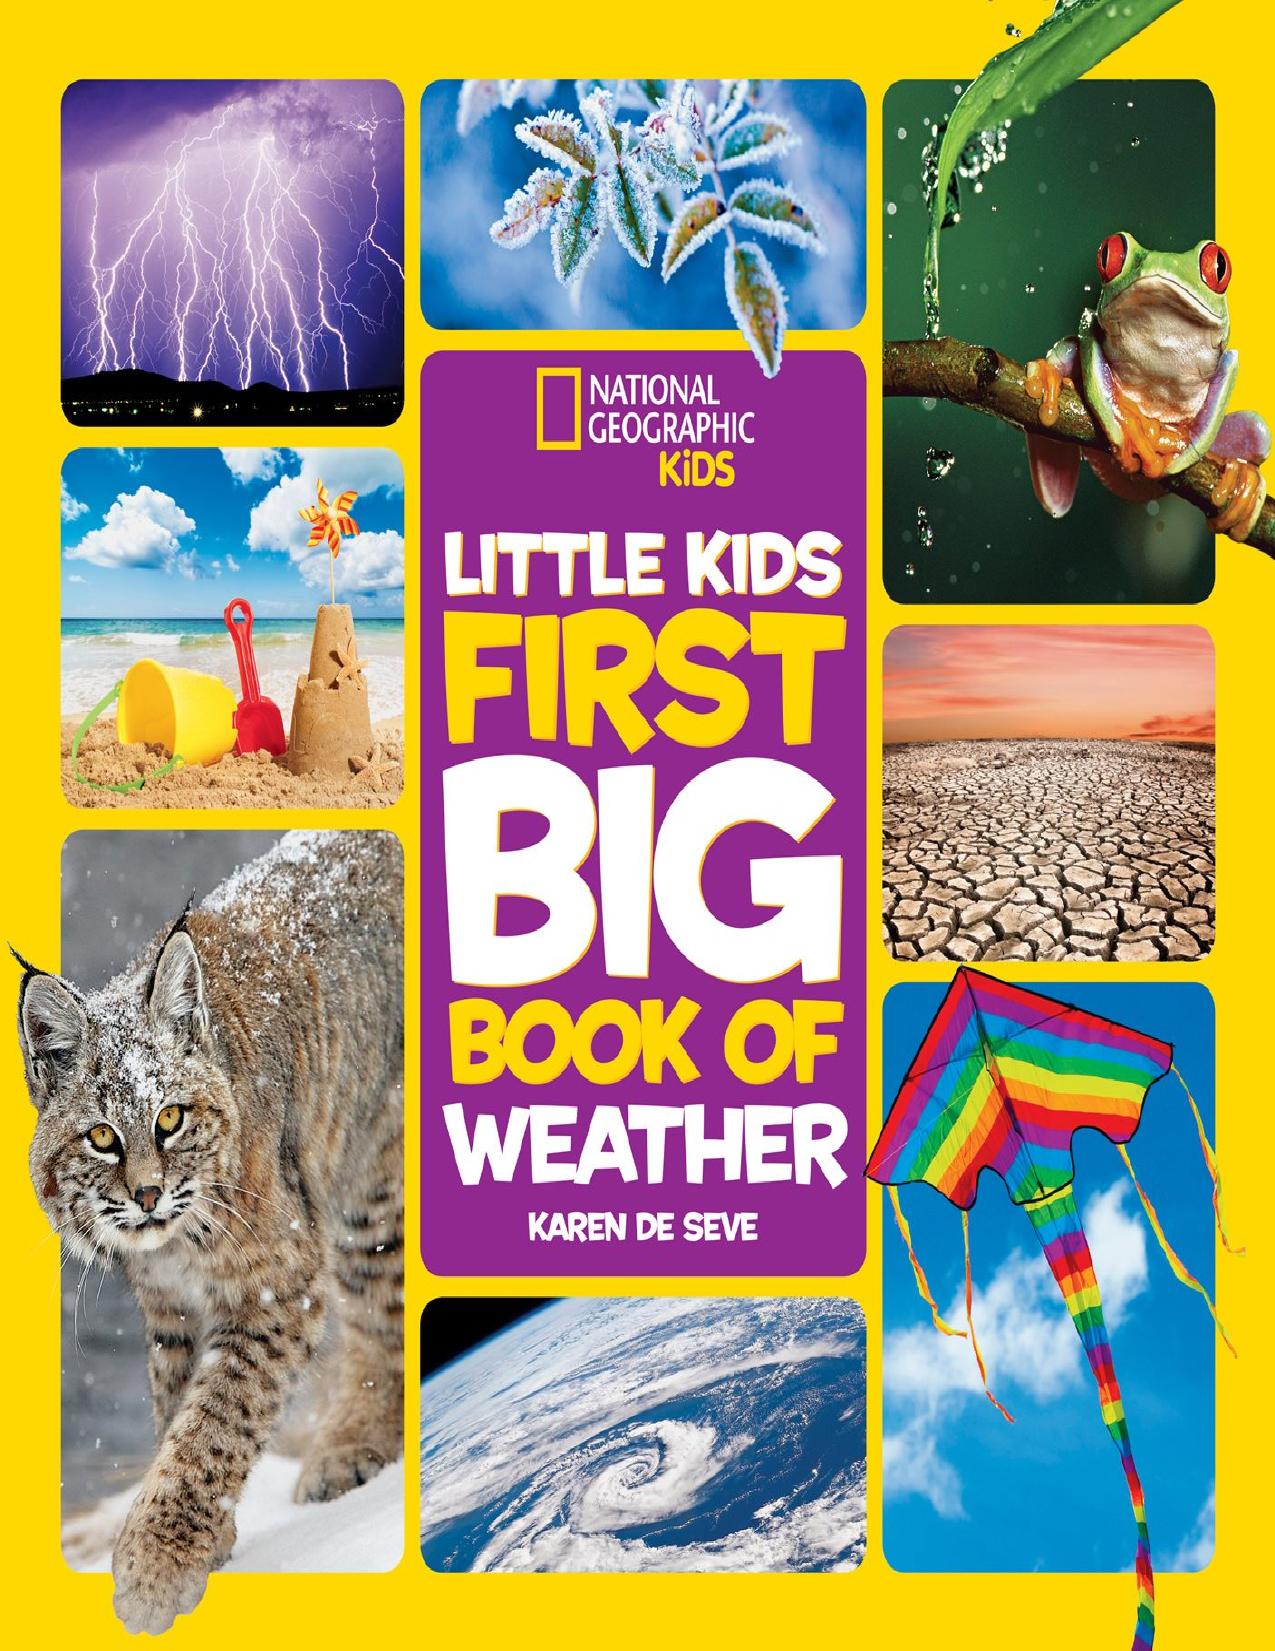 National Geographic Little Kids First Big Book of Weather by Karen de Seve